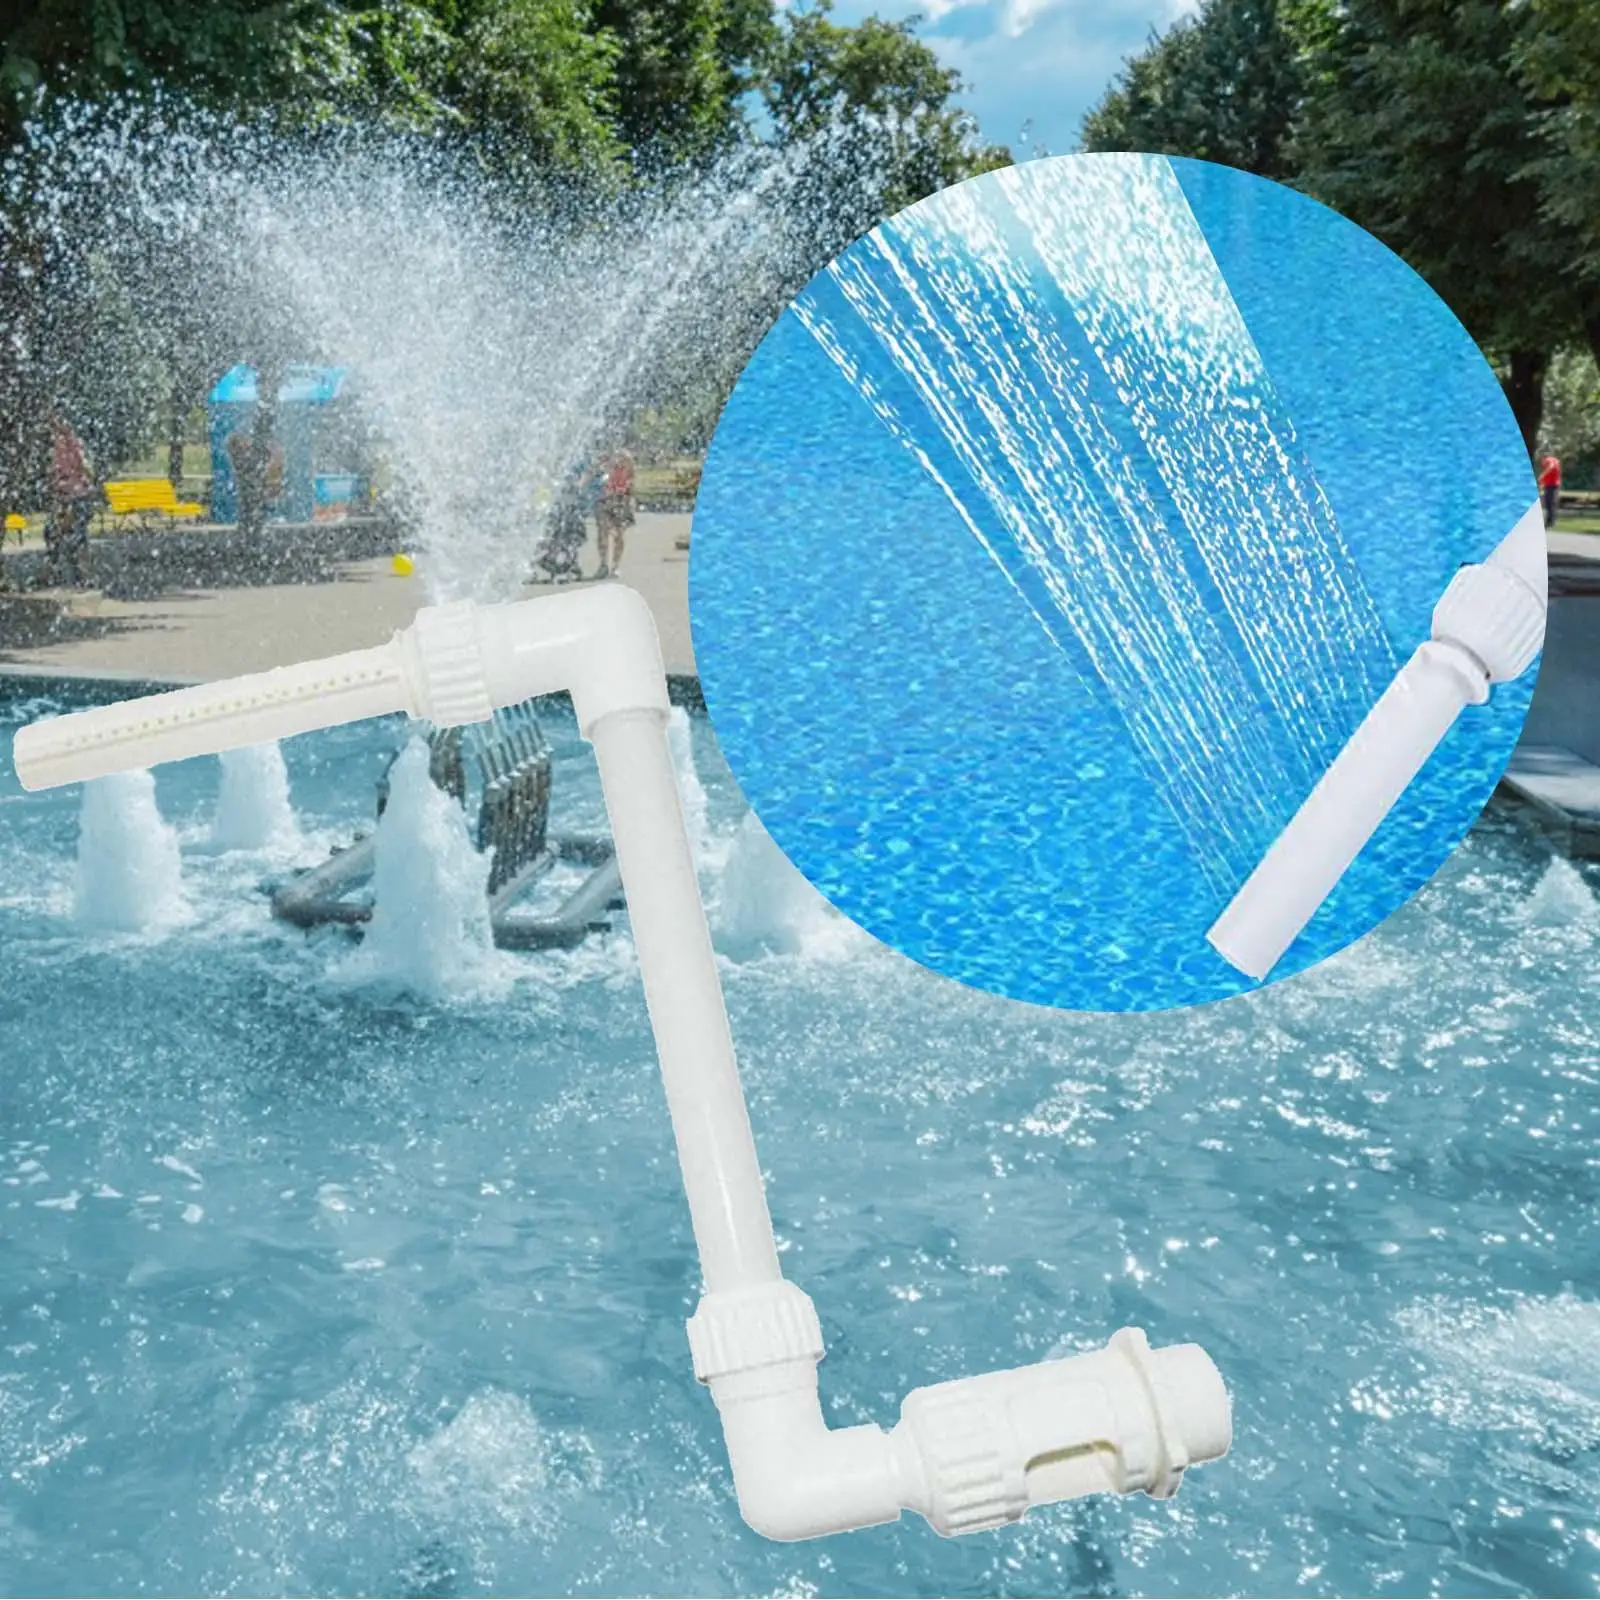 Cooling Aerator SPA Swimming Pool Waterfall Spray Adjustable Pool Aerator for in Ground Swimming Backyard above Ground Decor